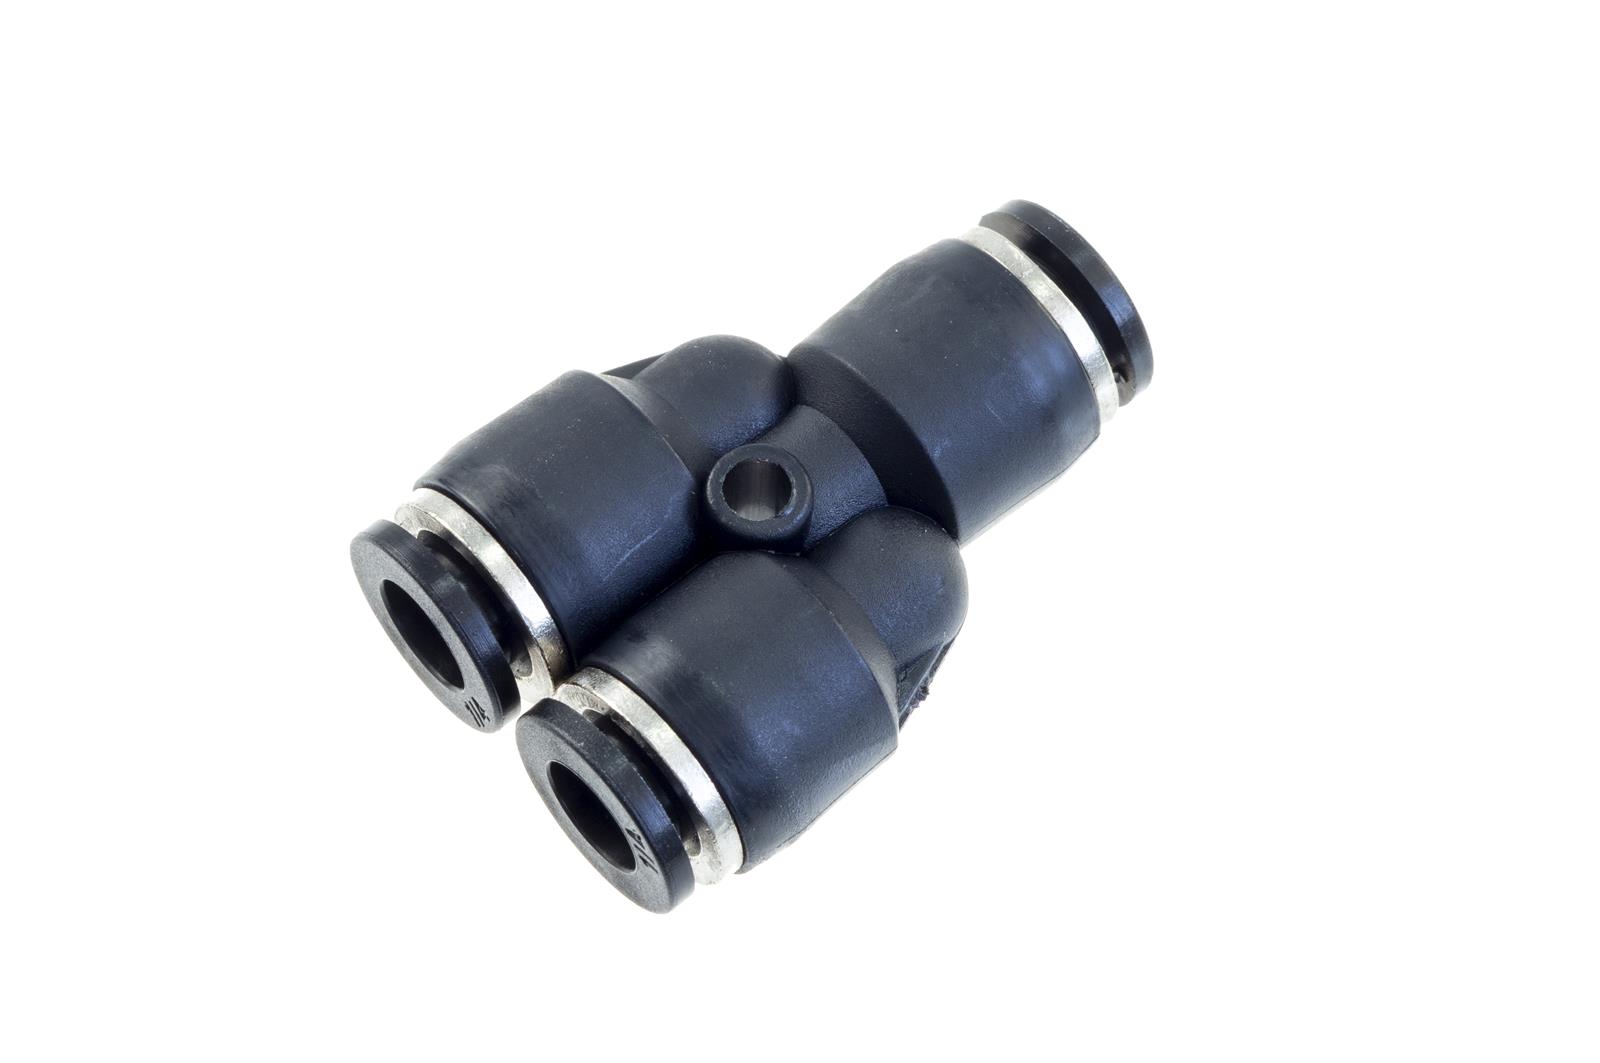 Redhorse Performance 4730-04-04-2 1/4in Vacuum Fitting Y Union (1/4in to 1/4in), Push To Connect - black